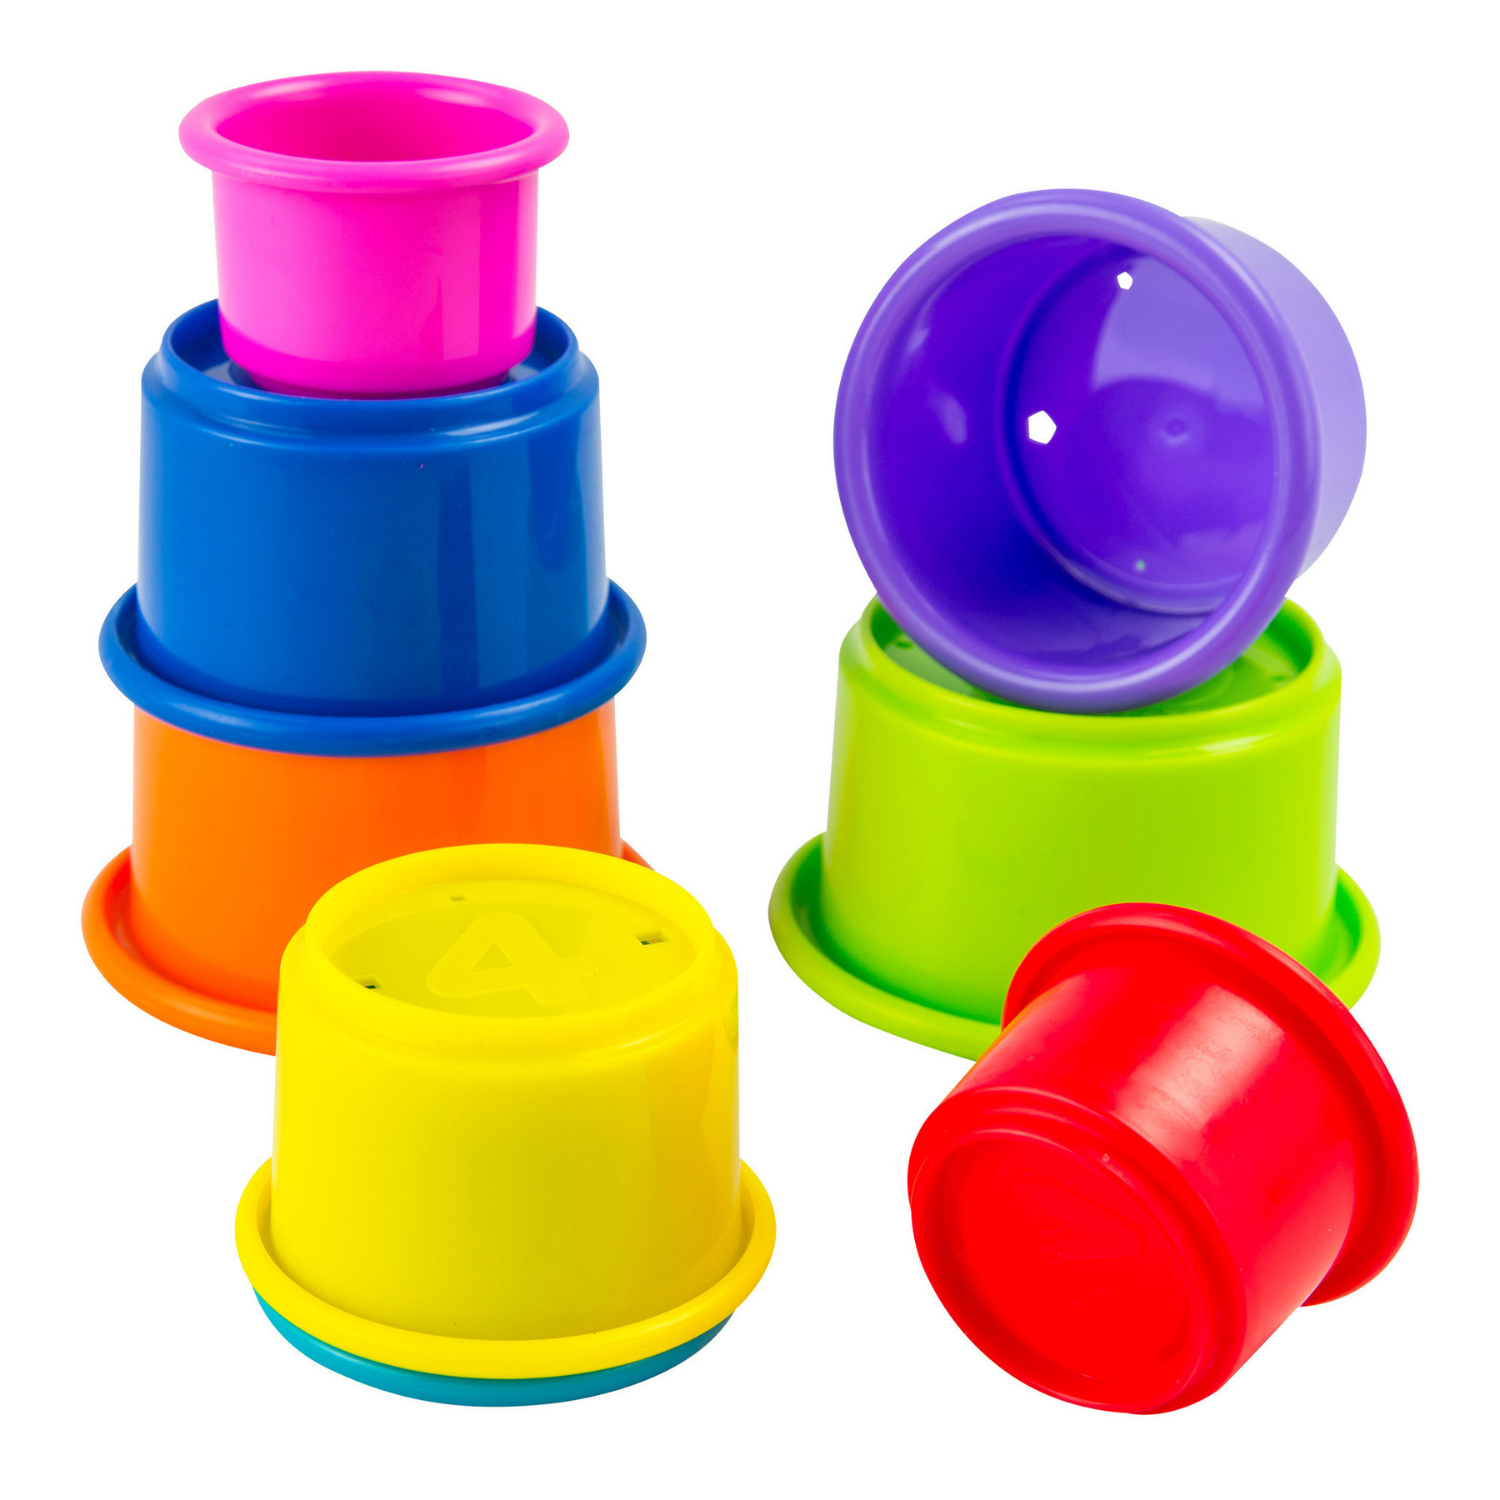 Lamaze Stacking Cups